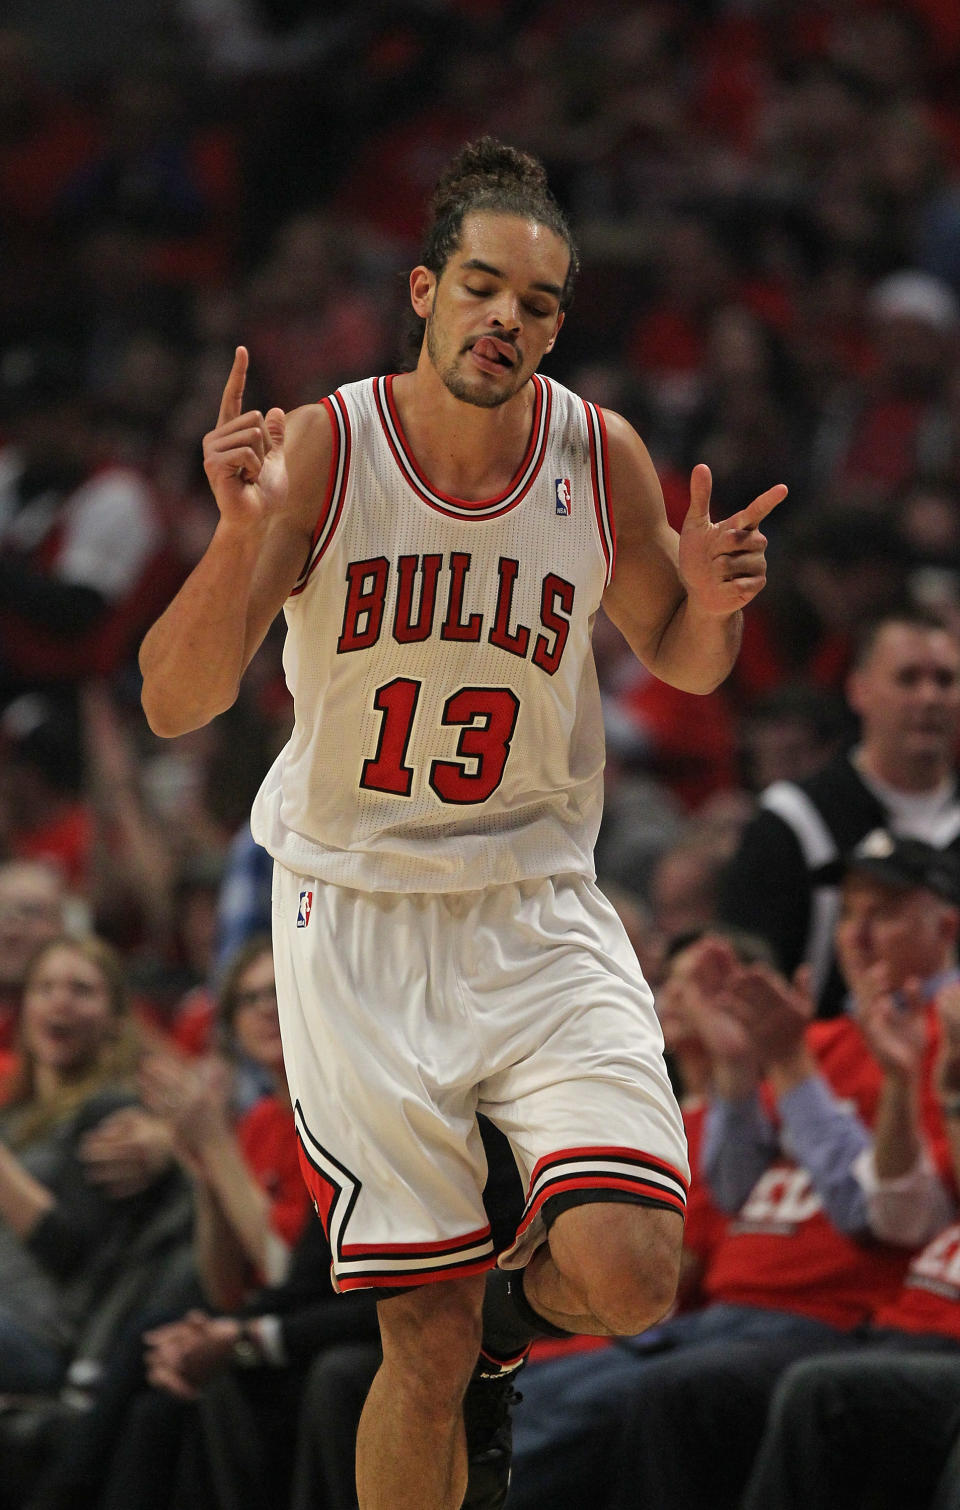 CHICAGO, IL - MAY 01: Joakim Noah #13 of the Chicago Bulls celebrates hitting a shot against the Philadelphia 76ers in Game Two of the Eastern Conference Quarterfinals during the 2012 NBA Playoffs at the United Center on May 1, 2012 in Chicago, Illinois. NOTE TO USER: User expressly acknowledges and agrees that, by downloading and or using this photograph, User is consenting to the terms and conditions of the Getty Images License Agreement. (Photo by Jonathan Daniel/Getty Images)